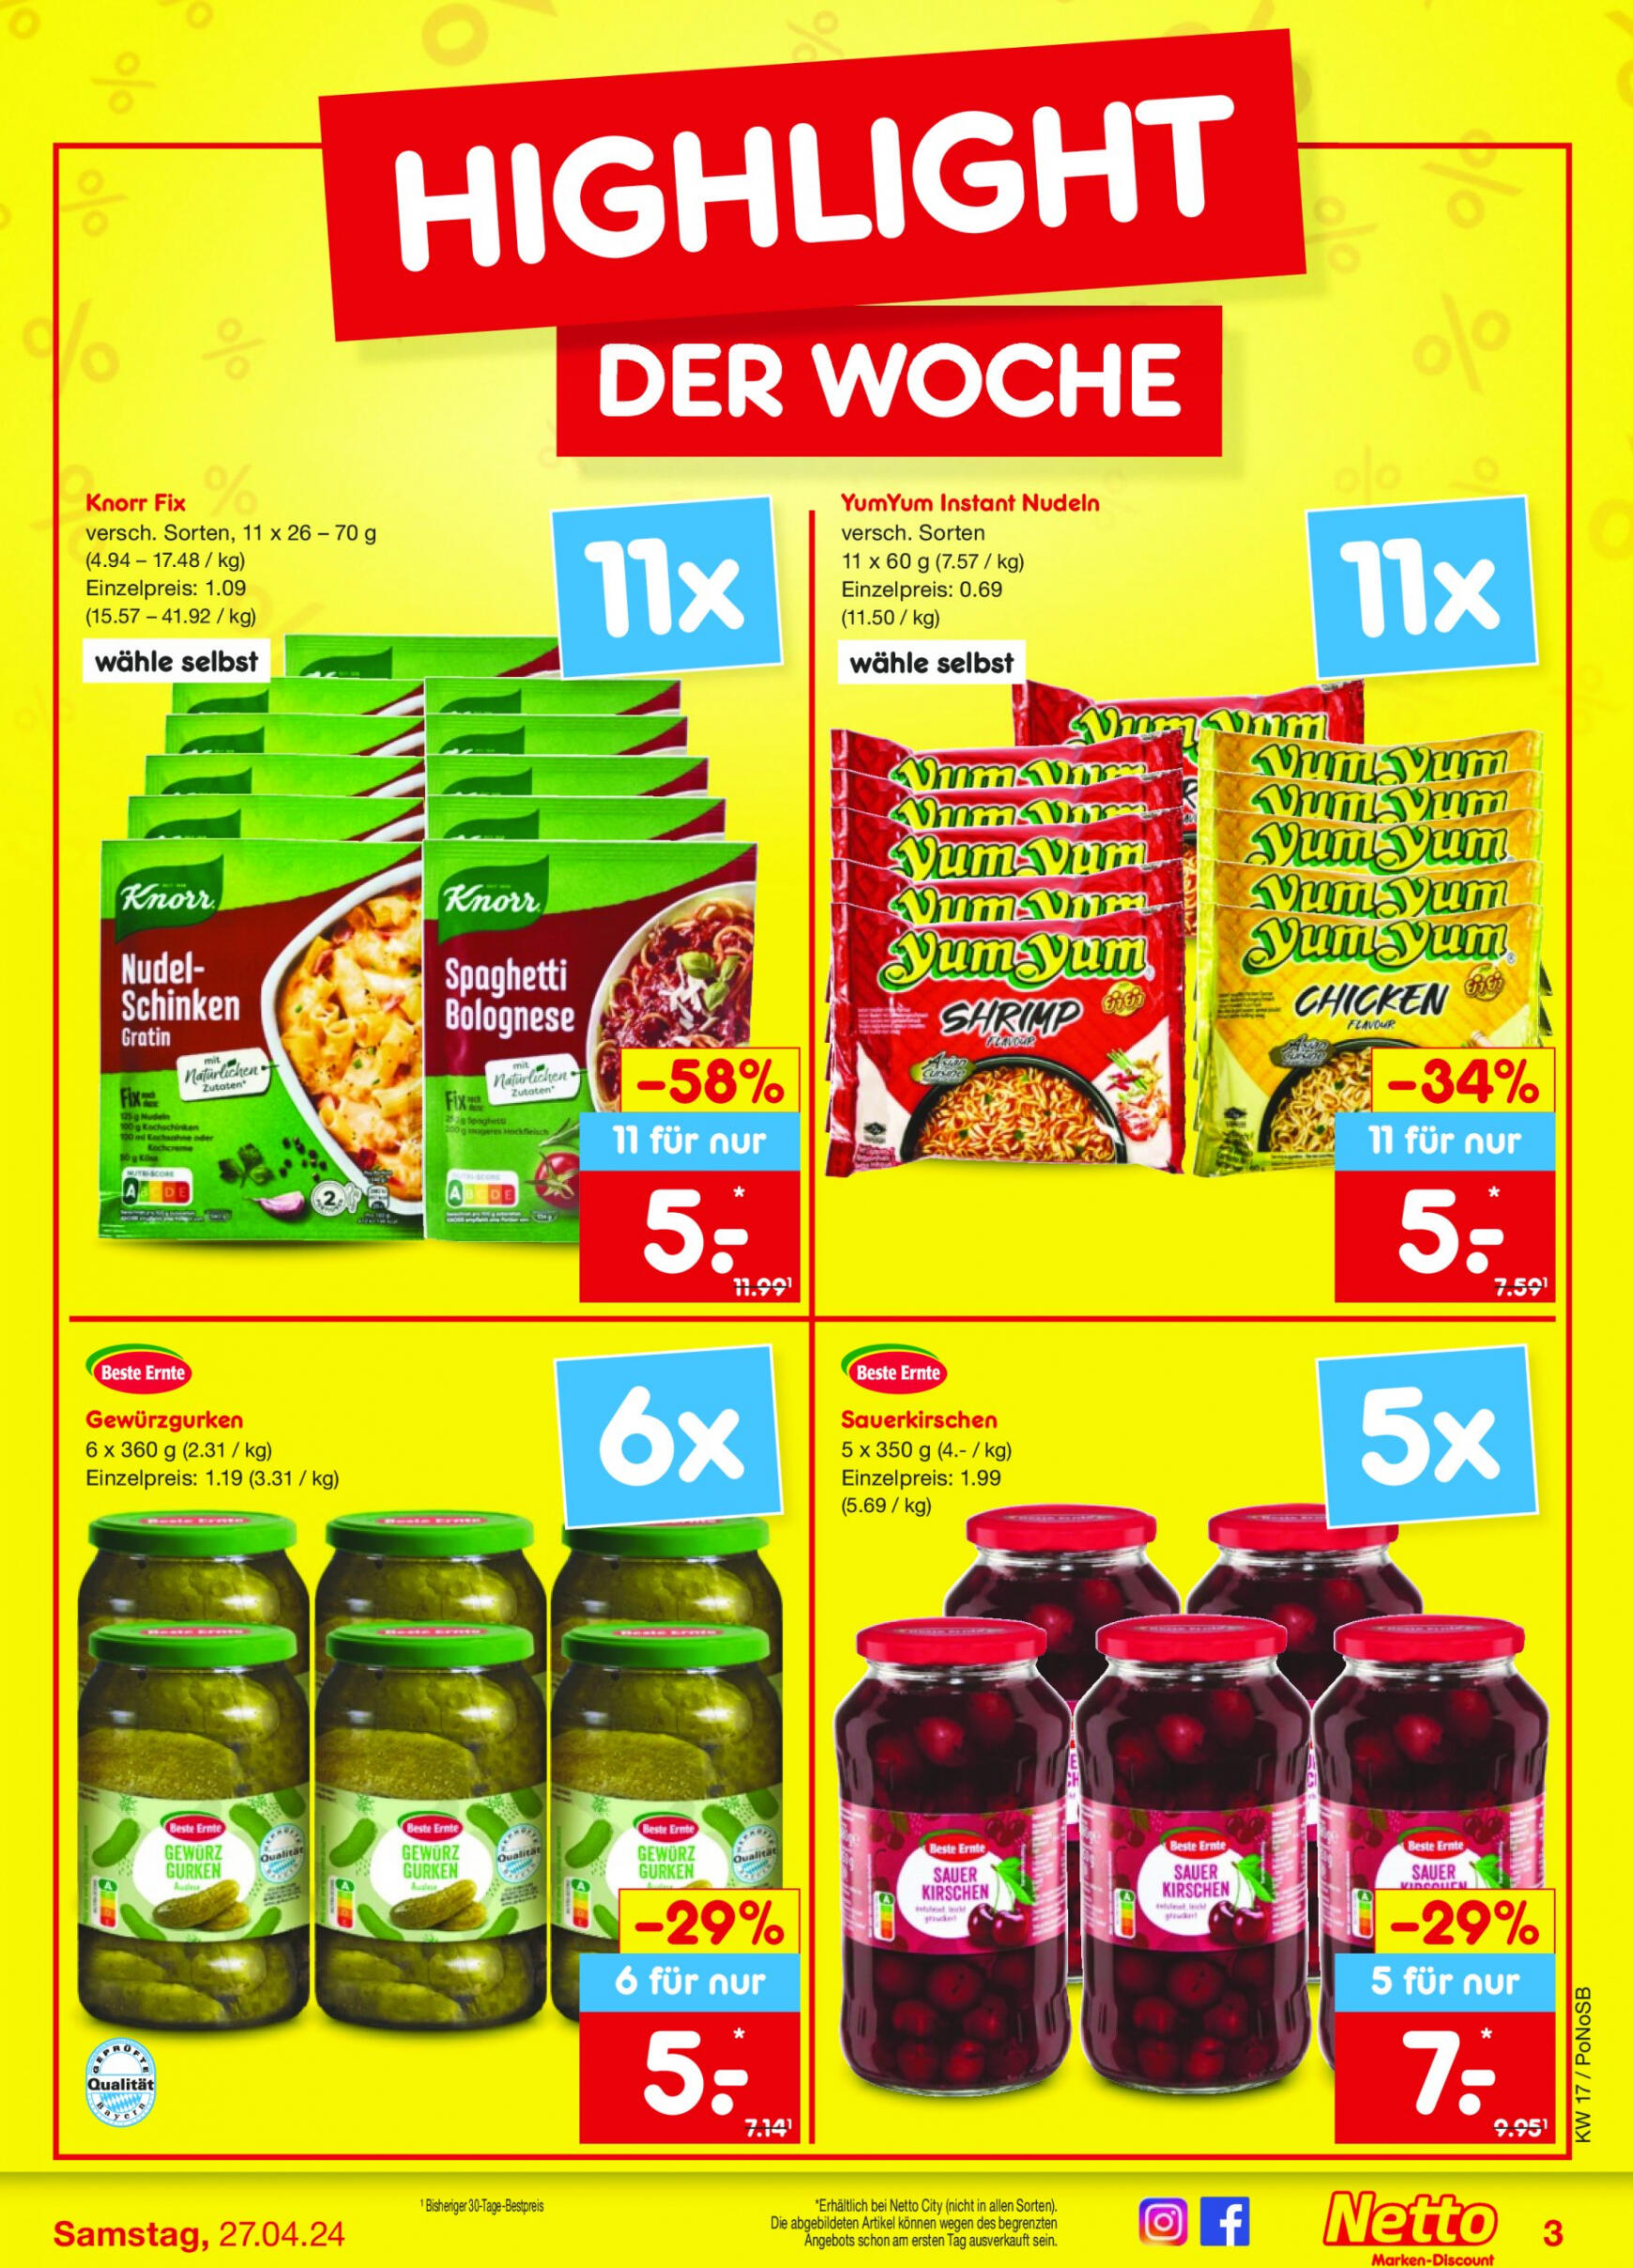 netto - Flyer Netto aktuell 22.04. - 27.04. - page: 3